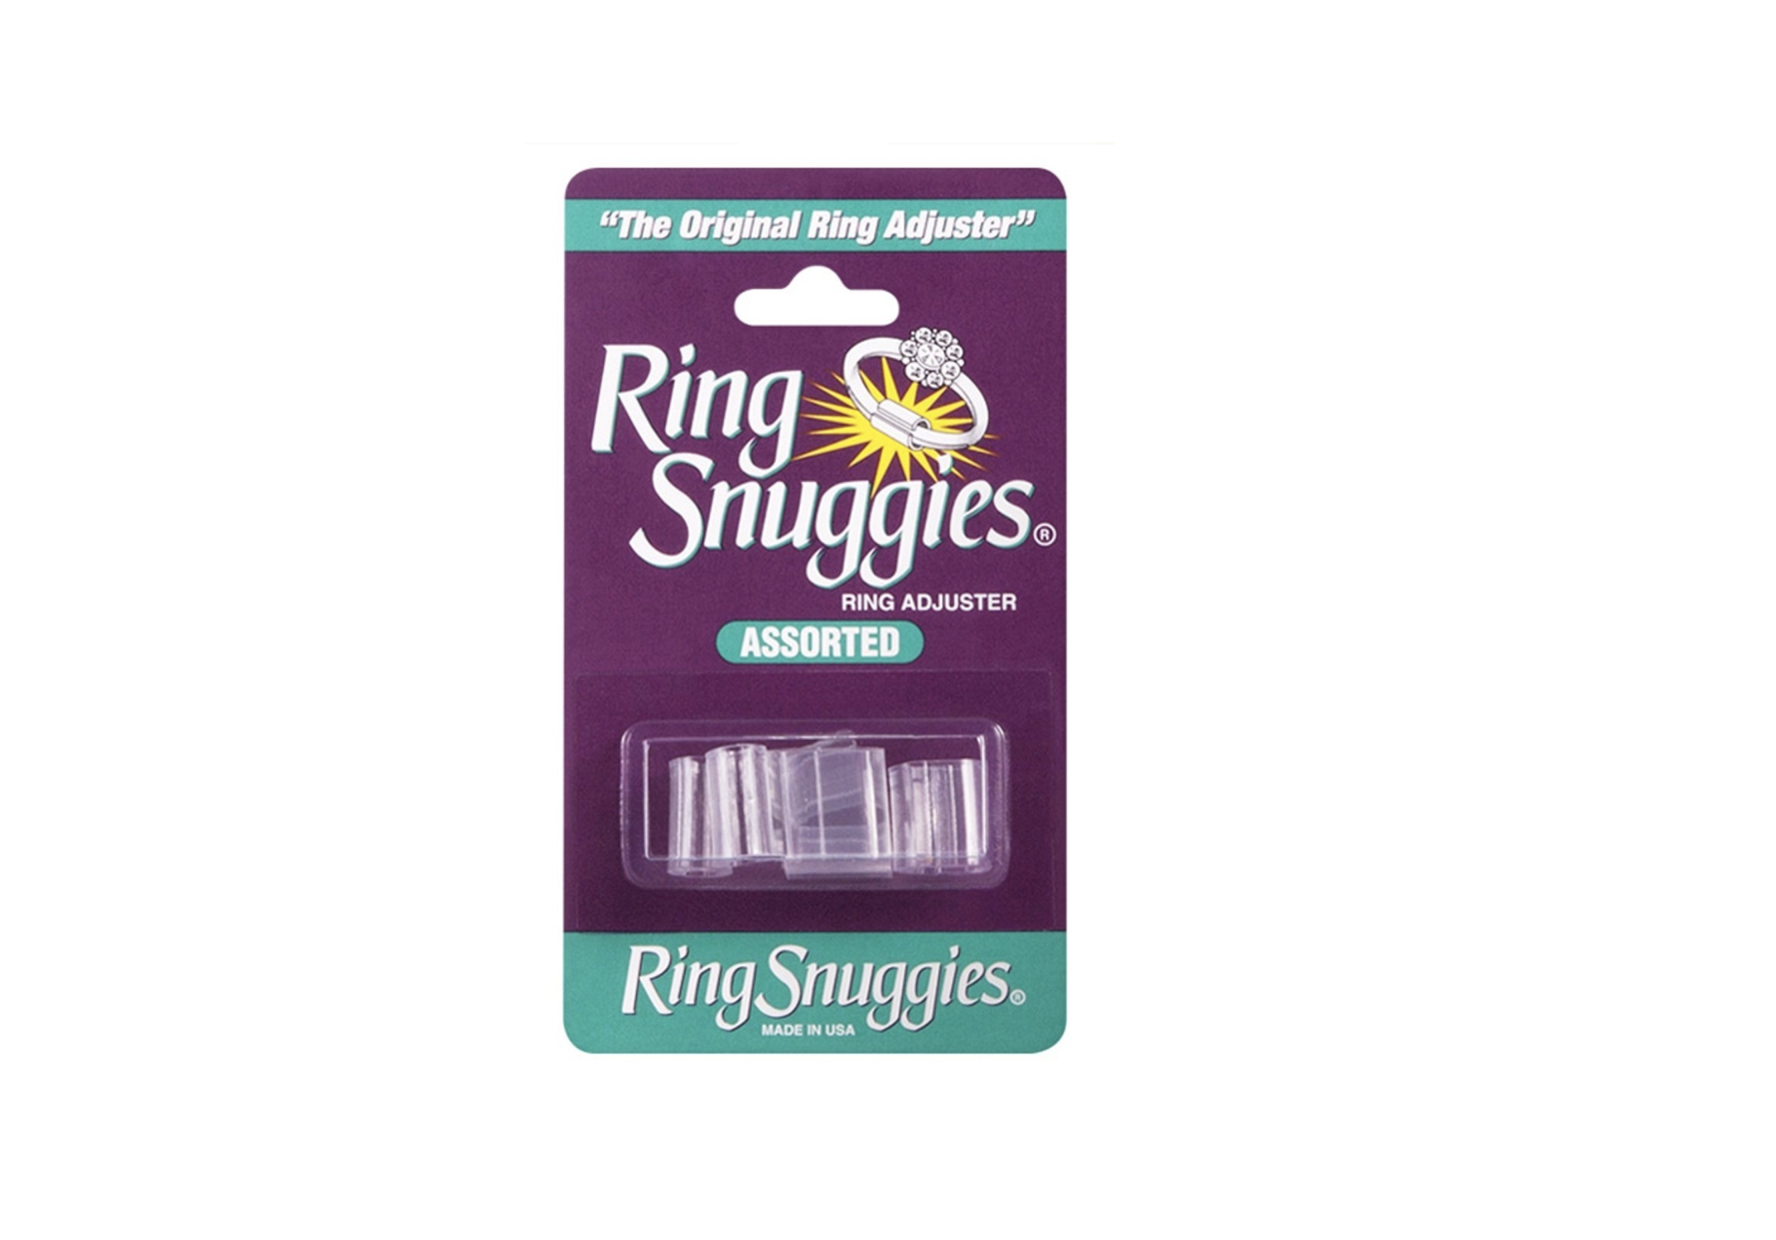 The Original Ring Adjuster Ring Guard Snuggies- Pack of 6 Assorted Sizes